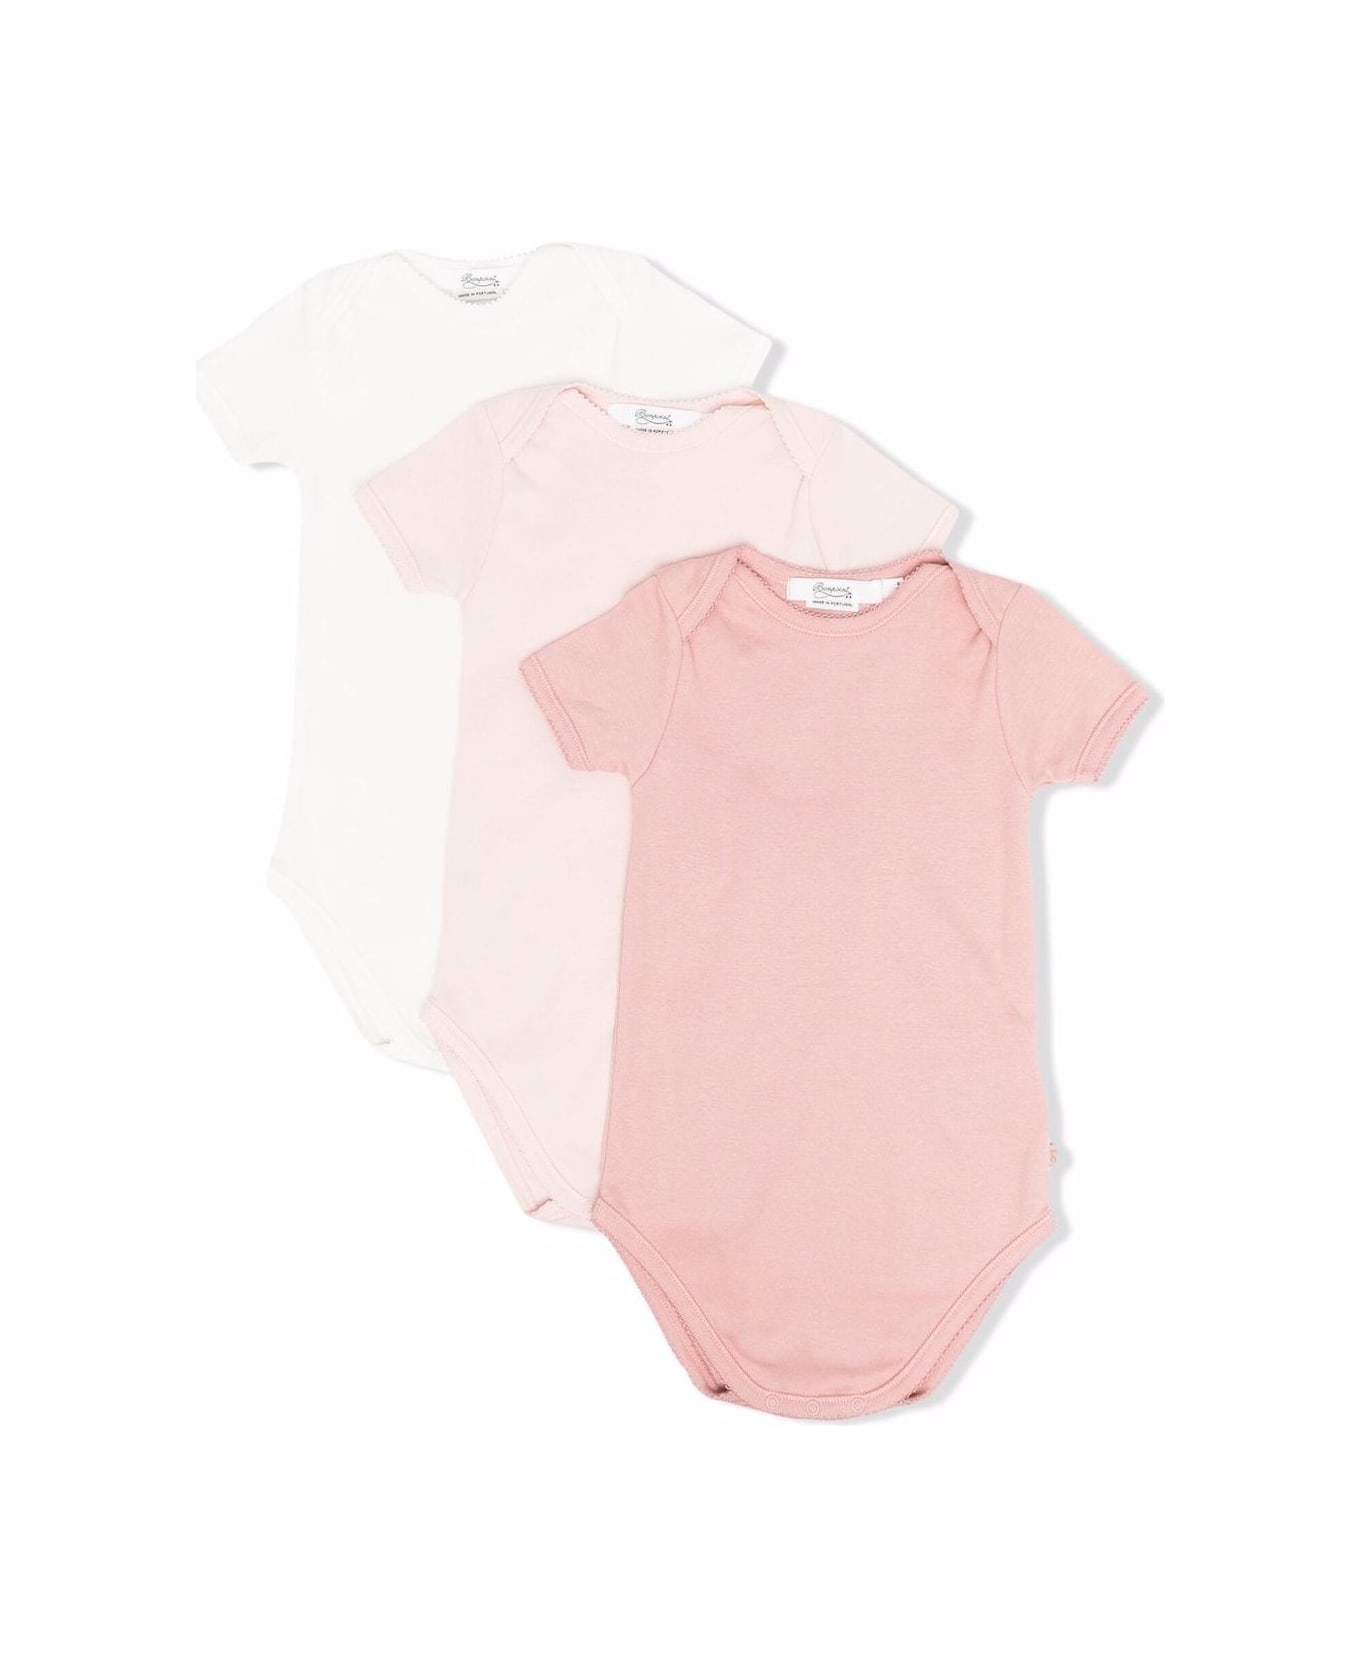 Bonpoint 3 Body Pack In Pink And White Cotton - Pink